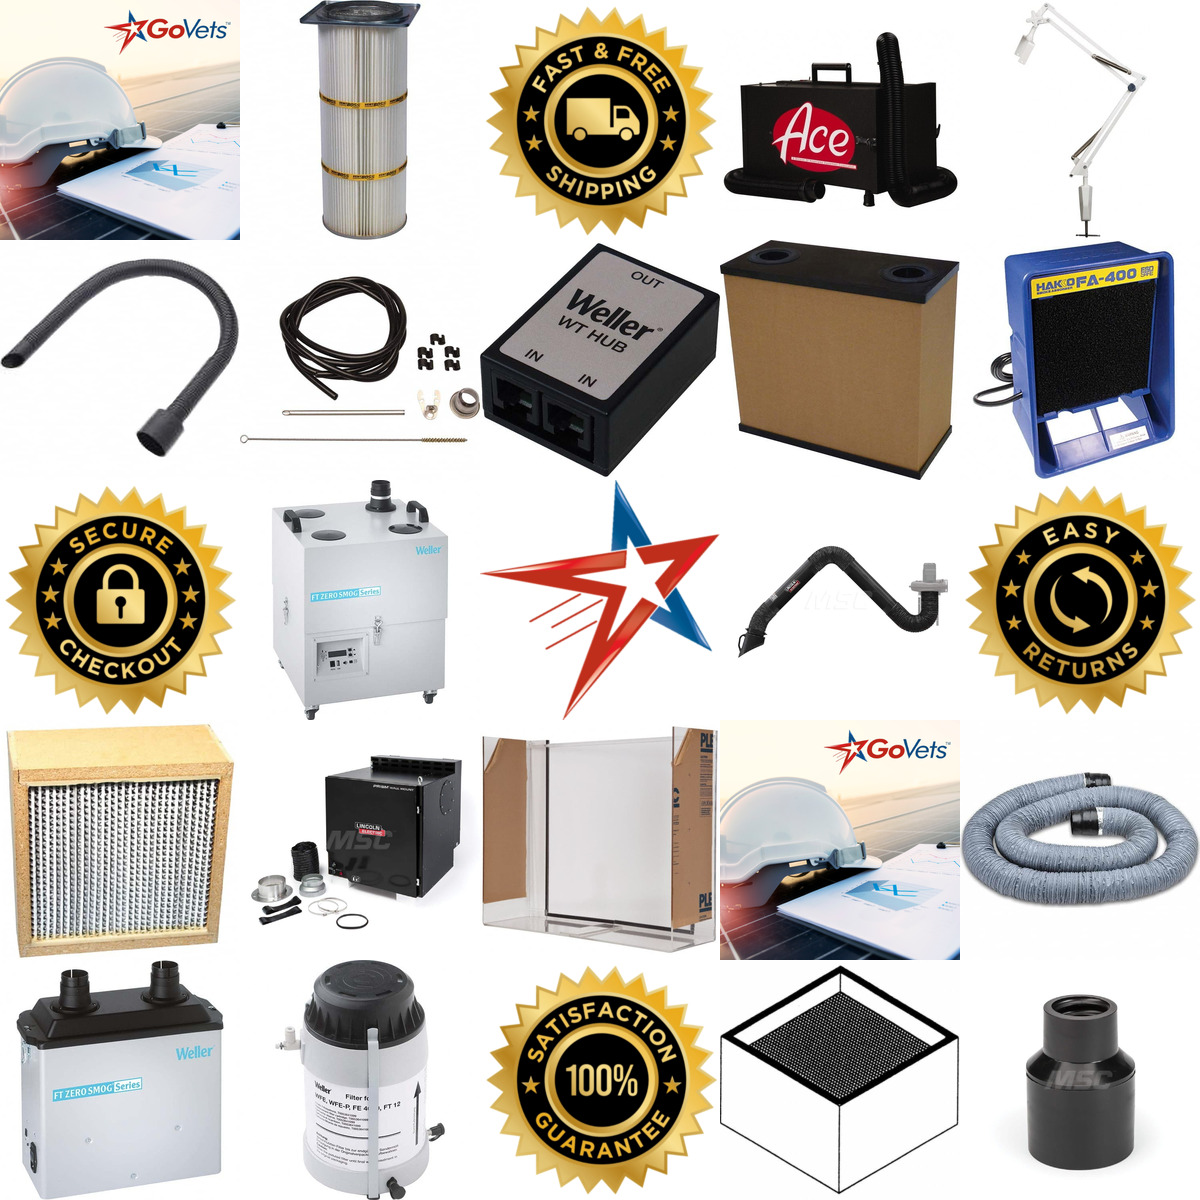 A selection of Fume Exhausters and Air Cleaners products on GoVets